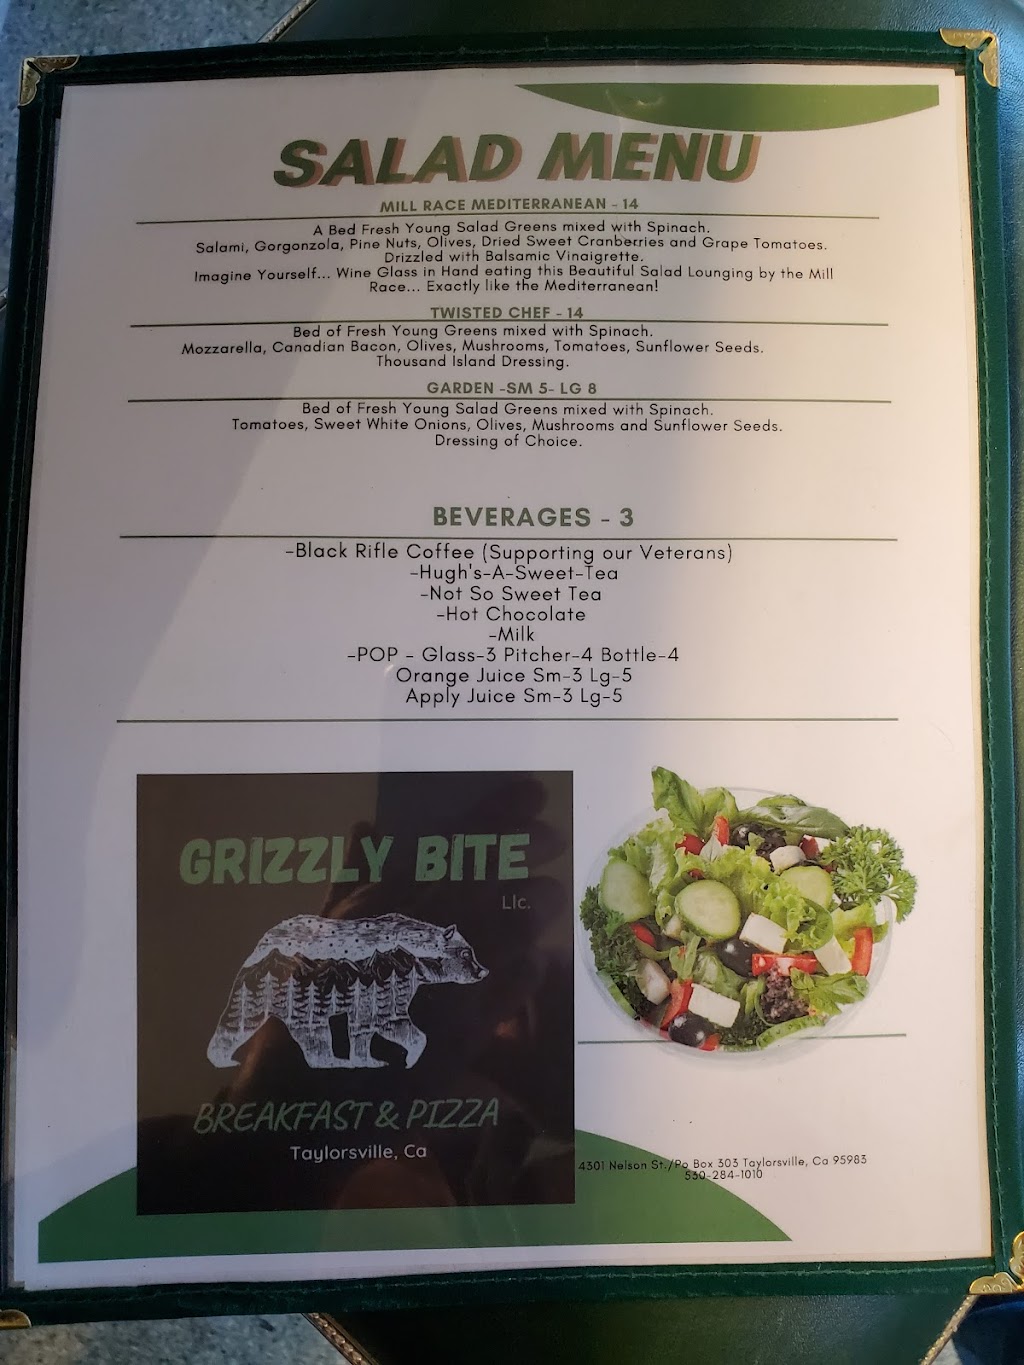 Grizzly Bite Cafe | cafe | 4301 Nelson St, Taylorsville, CA 95983, USA | 5302841010 OR +1 530-284-1010